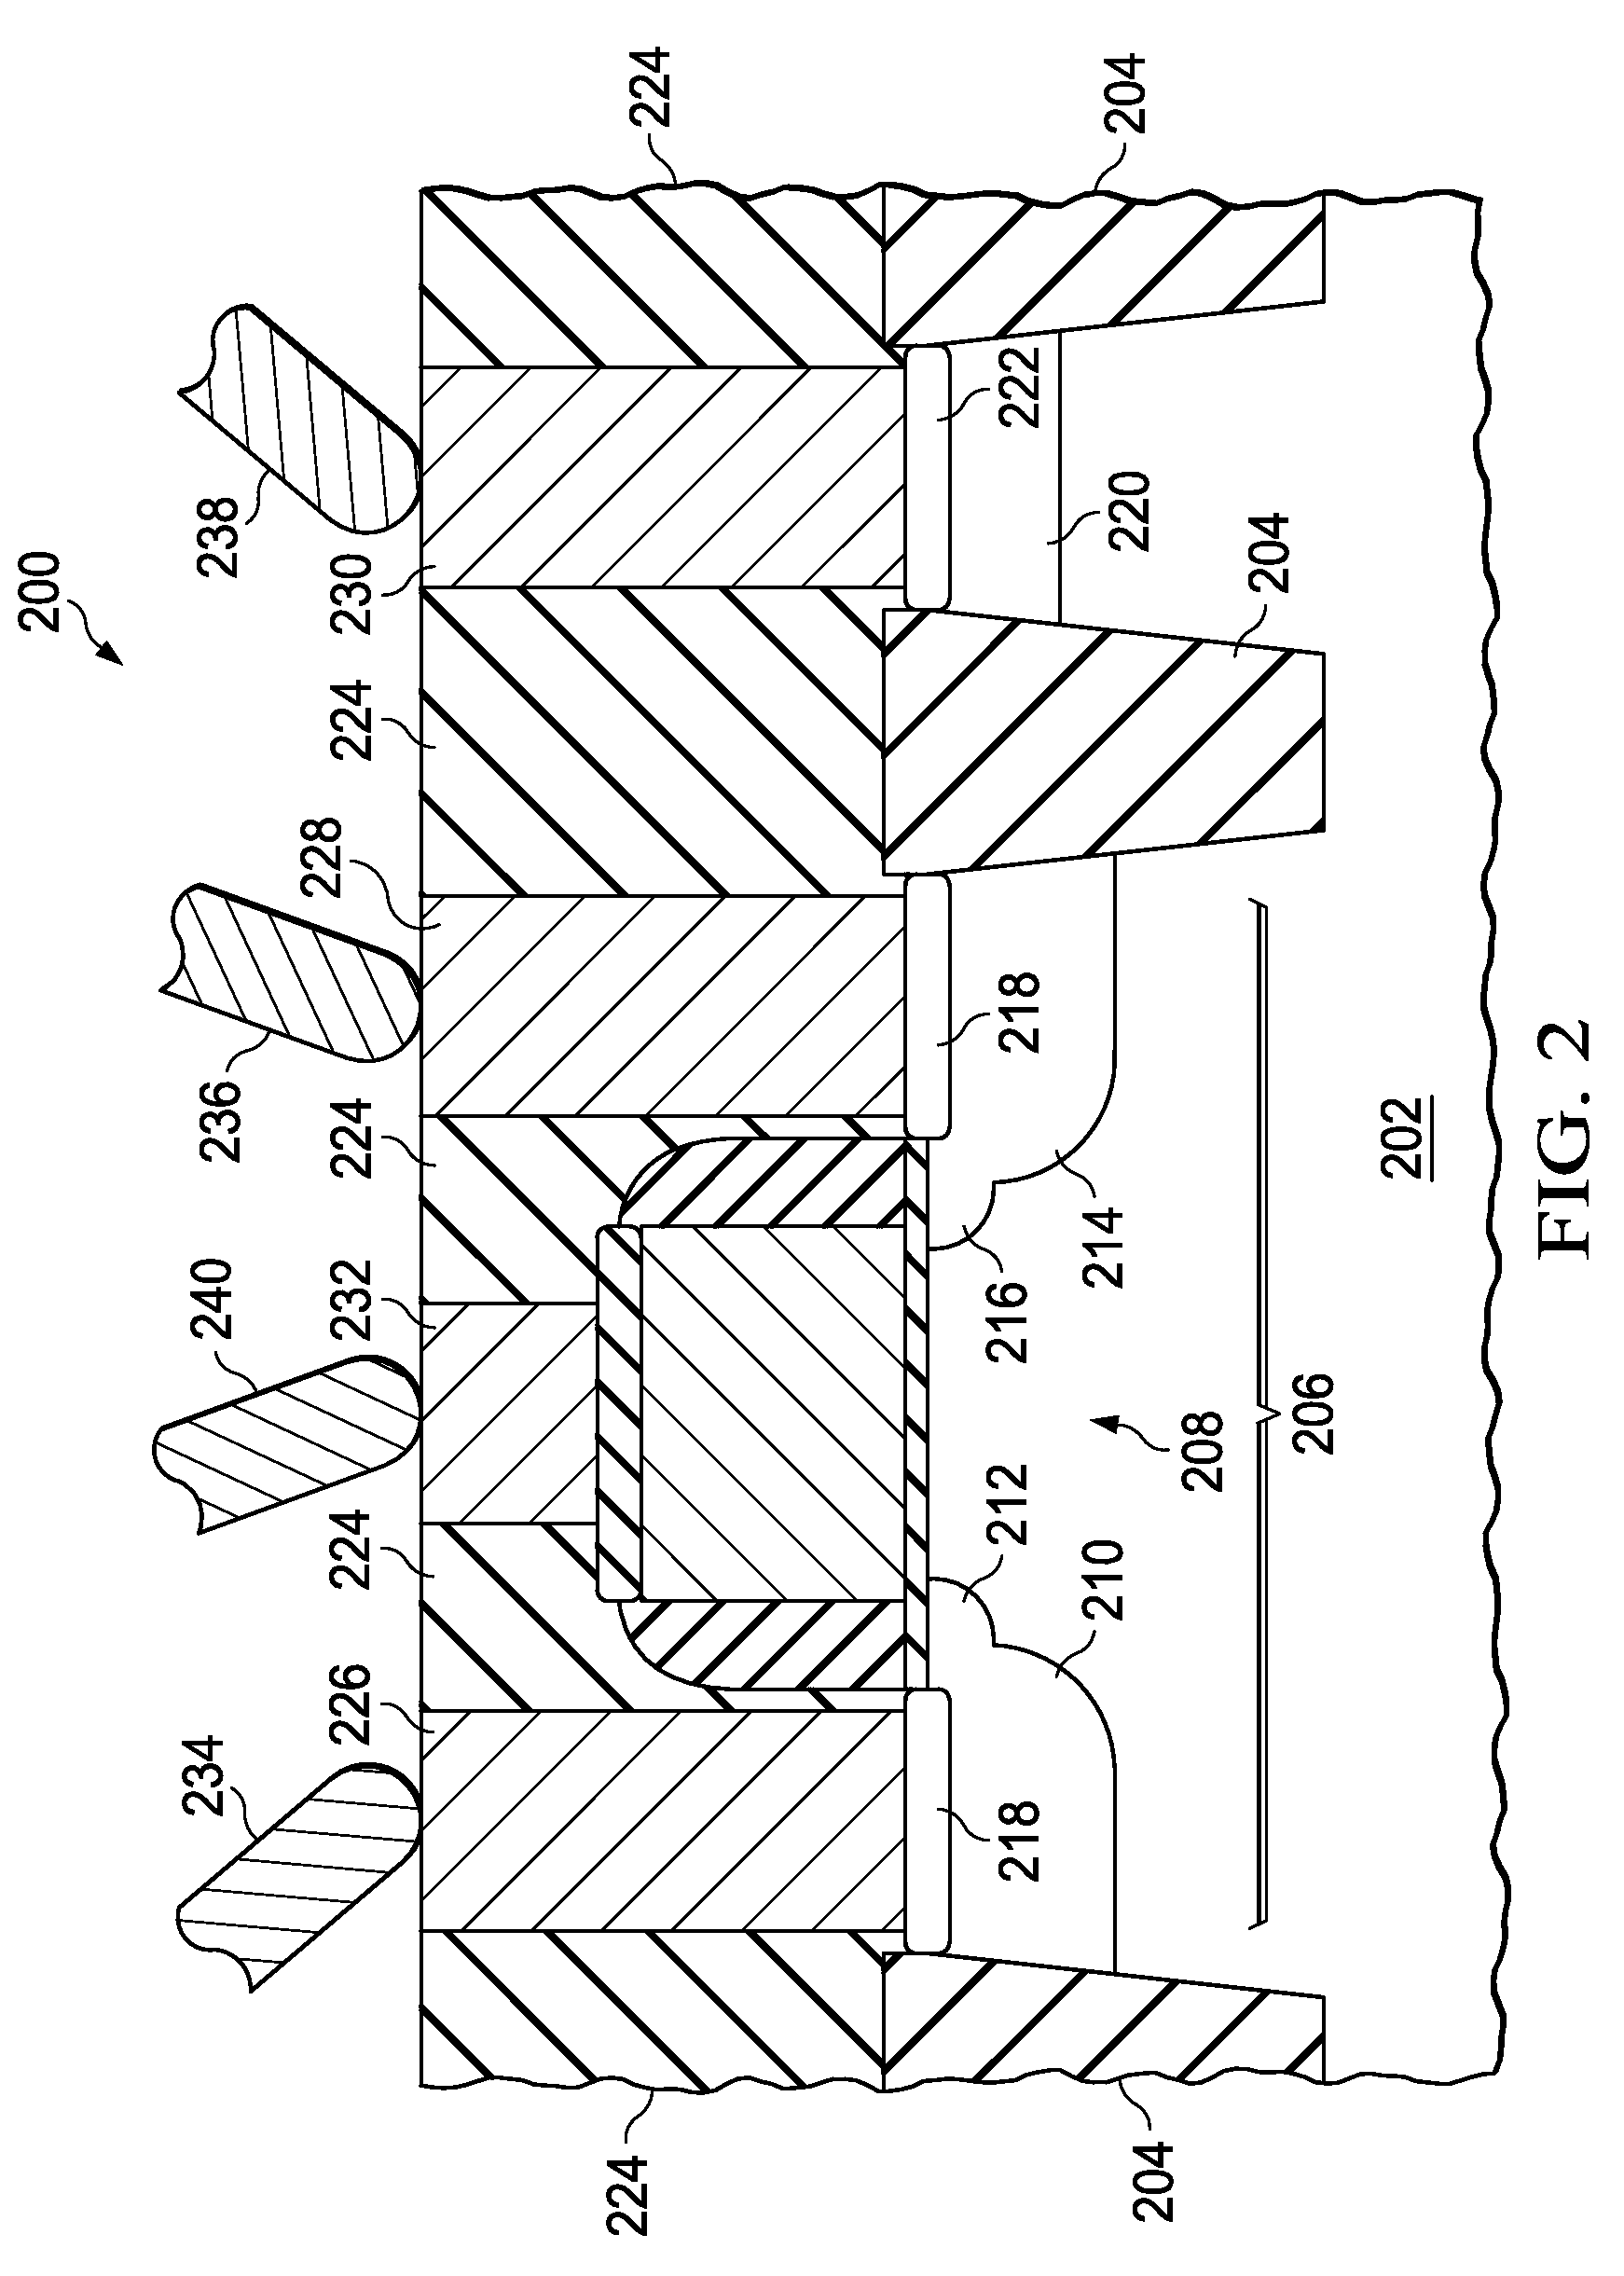 Method to accurately estimate the source and drain resistance of a MOSFET